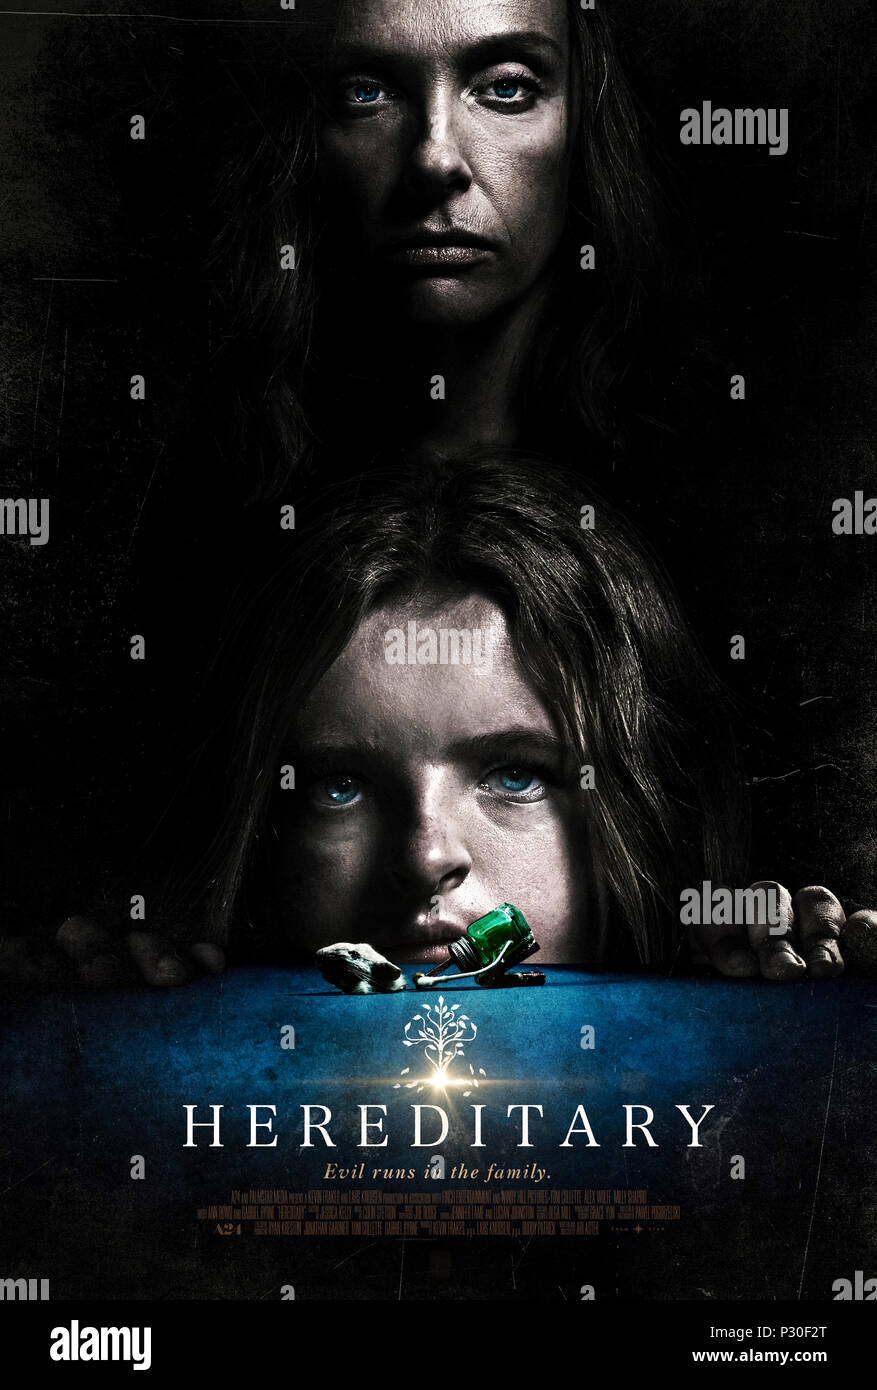 Hereditary (2018) dirtected by Ari Aster and starring Alex Wolff, Toni Collette, Milly Shapiro and Gabriel Byrne. A daughter looks into her family’s past on the death of her mother and discovers ‘Evil runs in the family’. Stock Photo